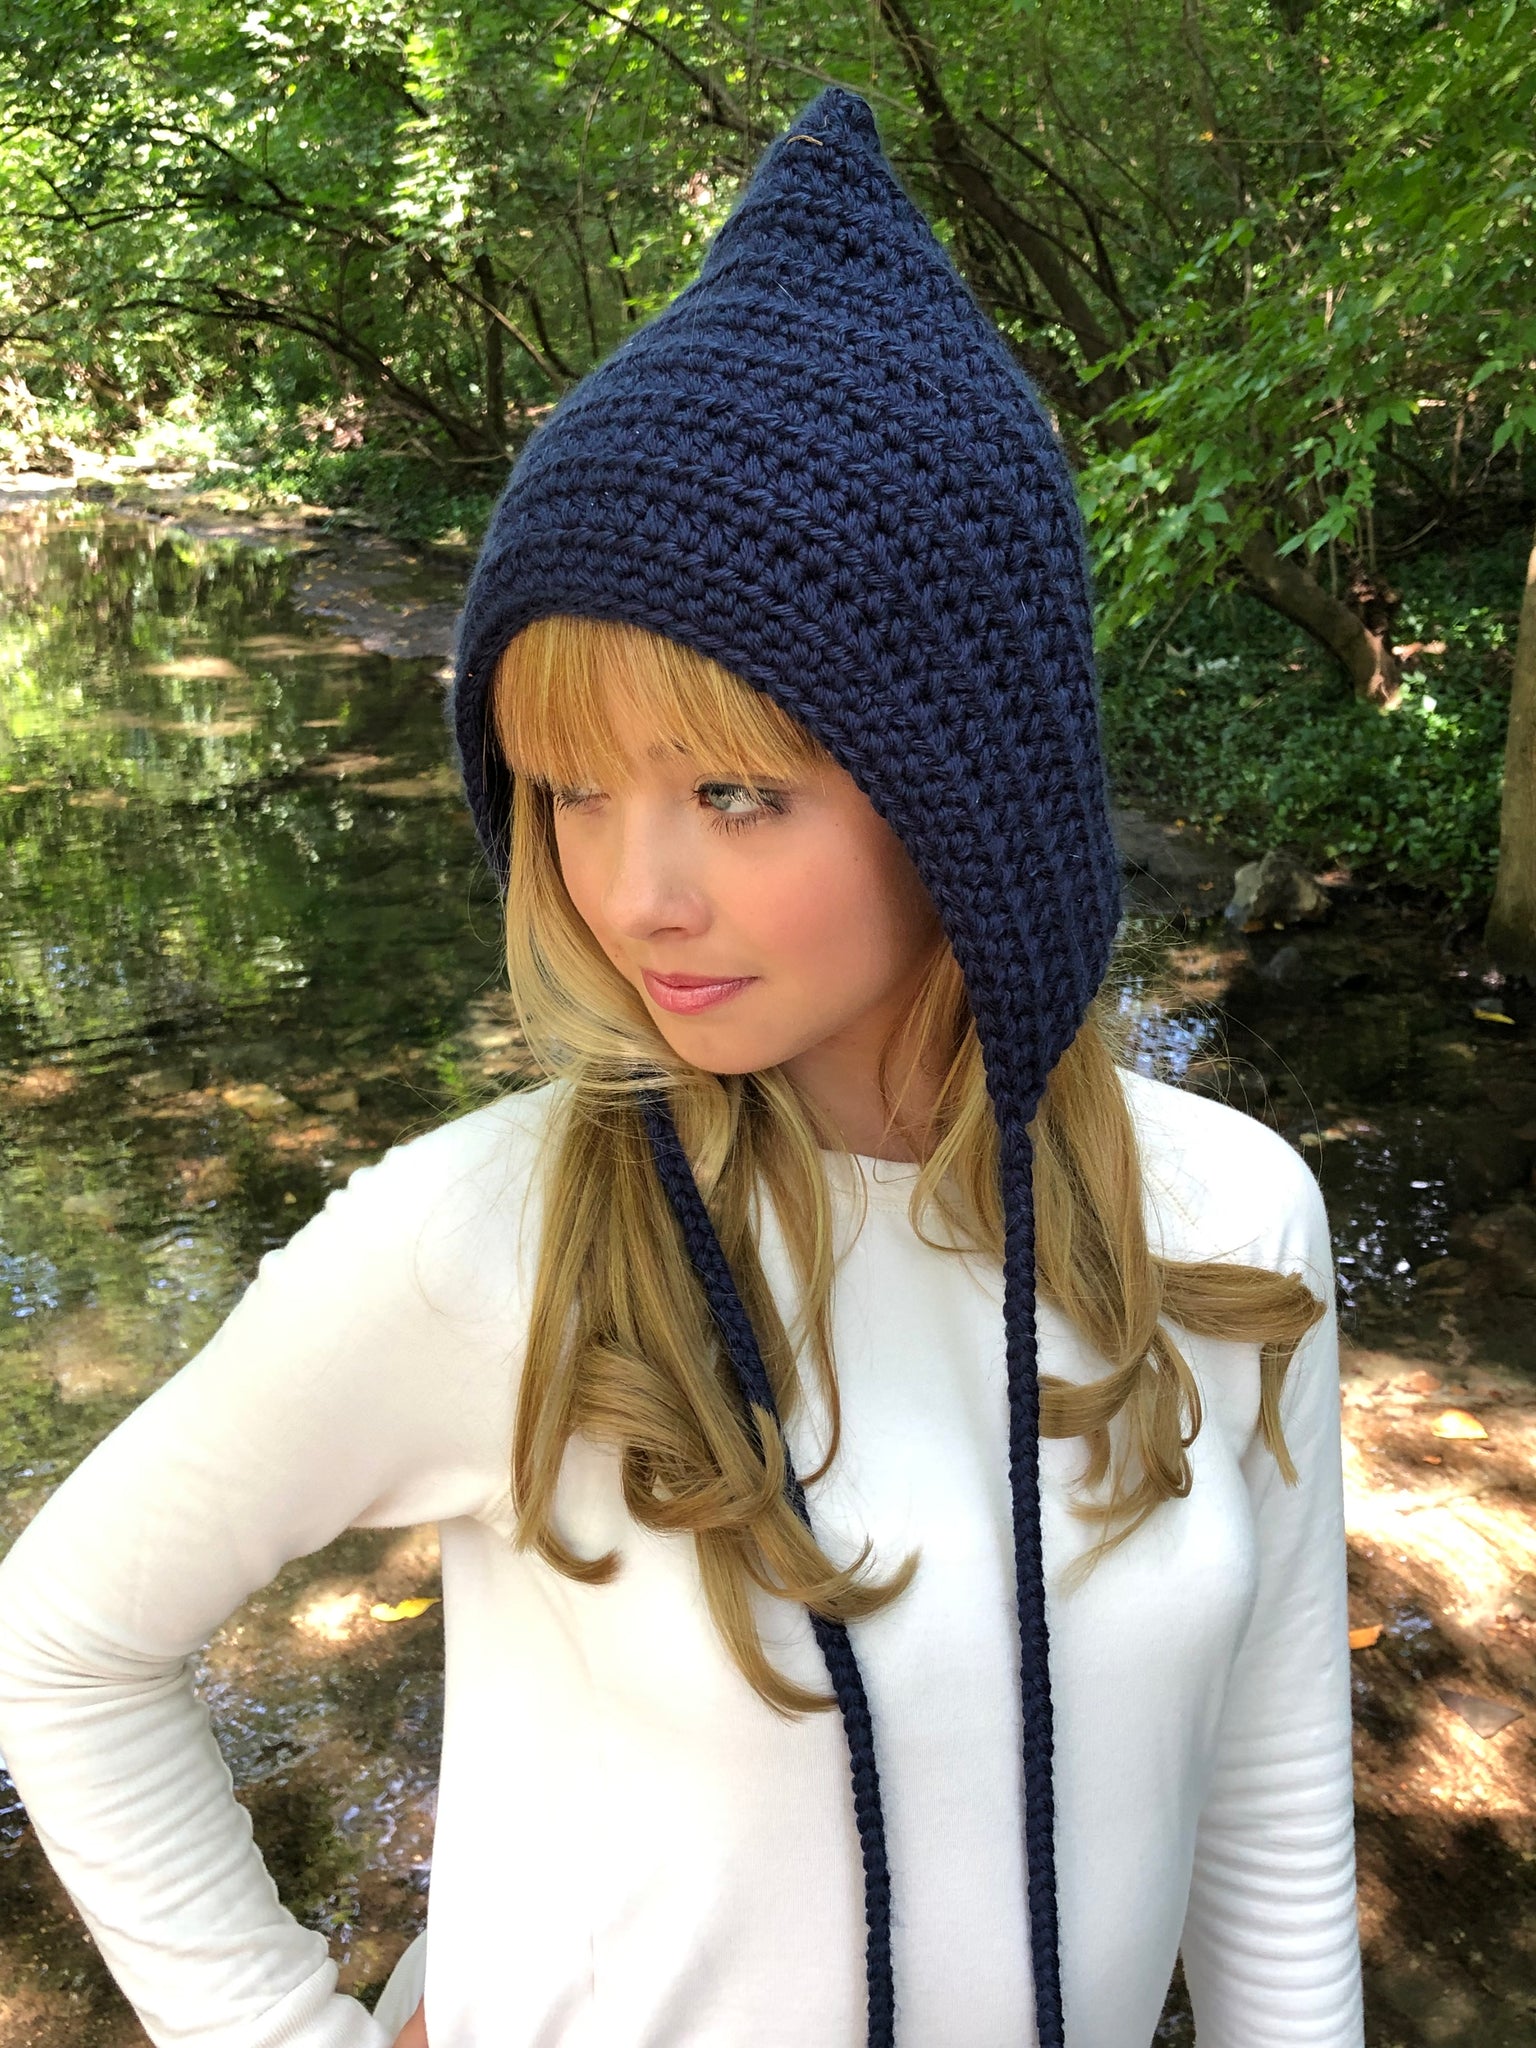 Navy blue pixie elf hat by Two Seaside Babes